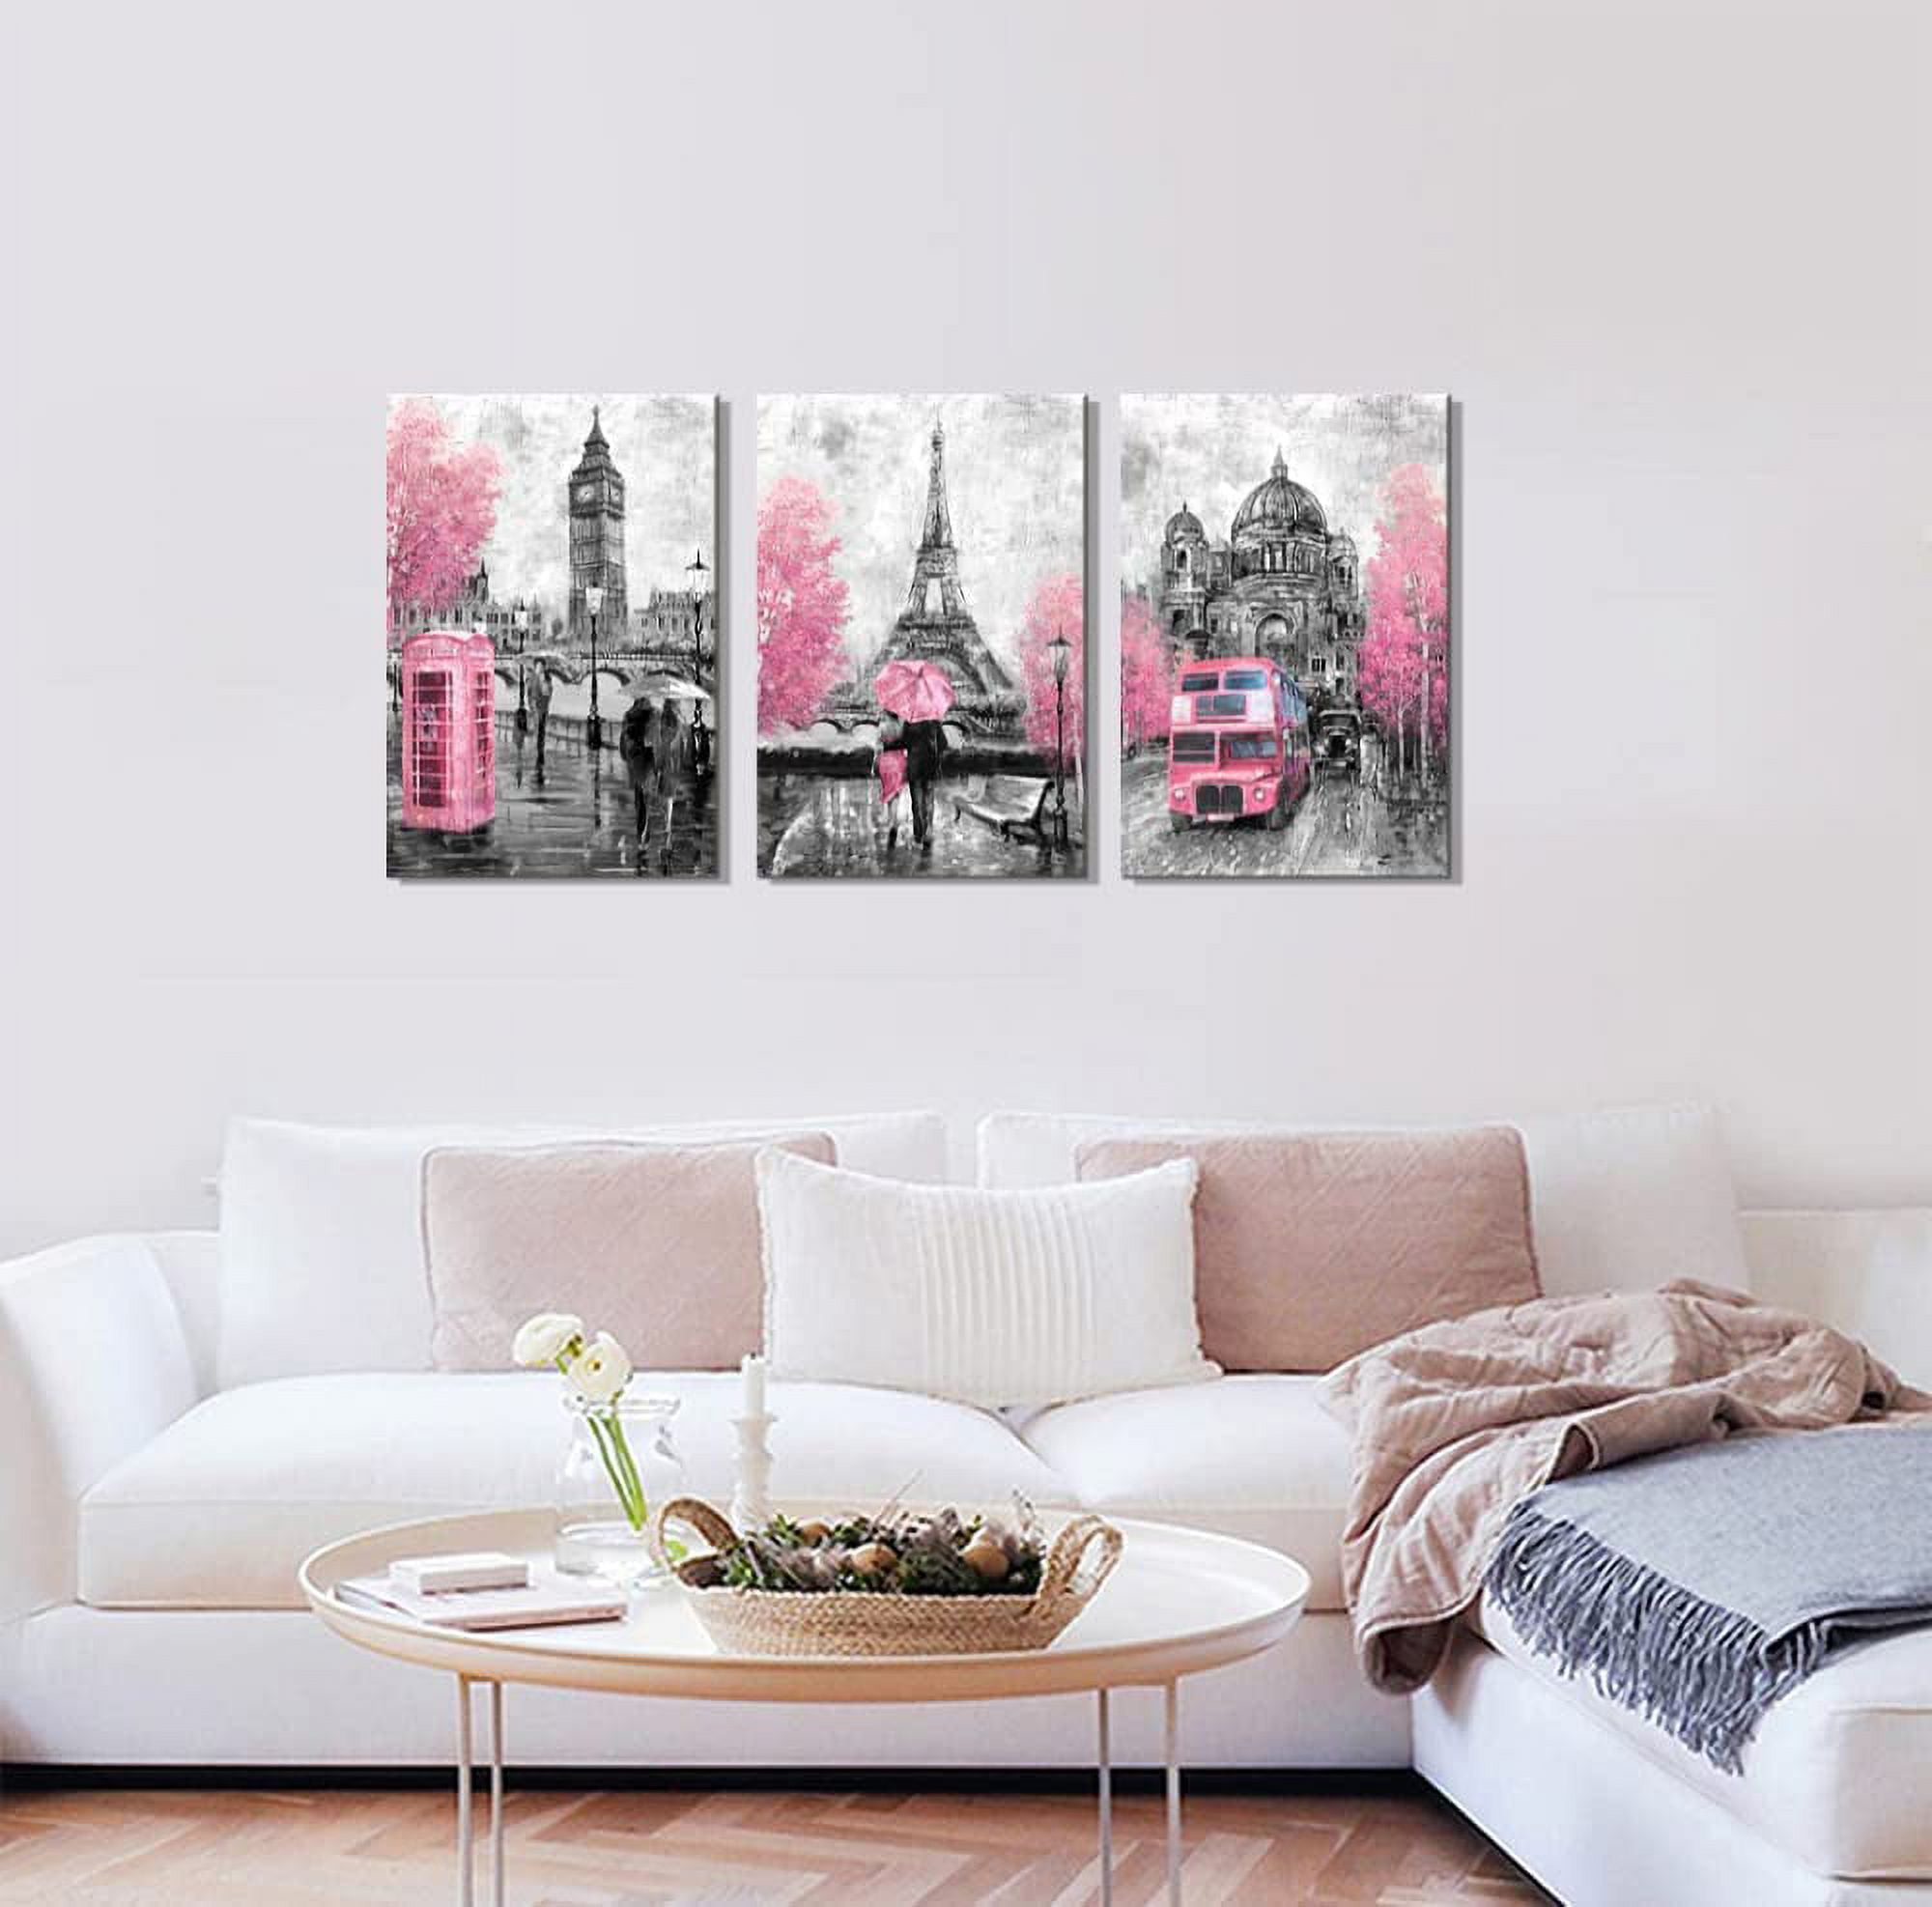 Large Wall Art for Bedroom Living Room Bathroom Black and White Paris Decor  Print for Girls' Rooom Pink Paris Theme London Big Ben Tower Eiffel Tower  Painting 